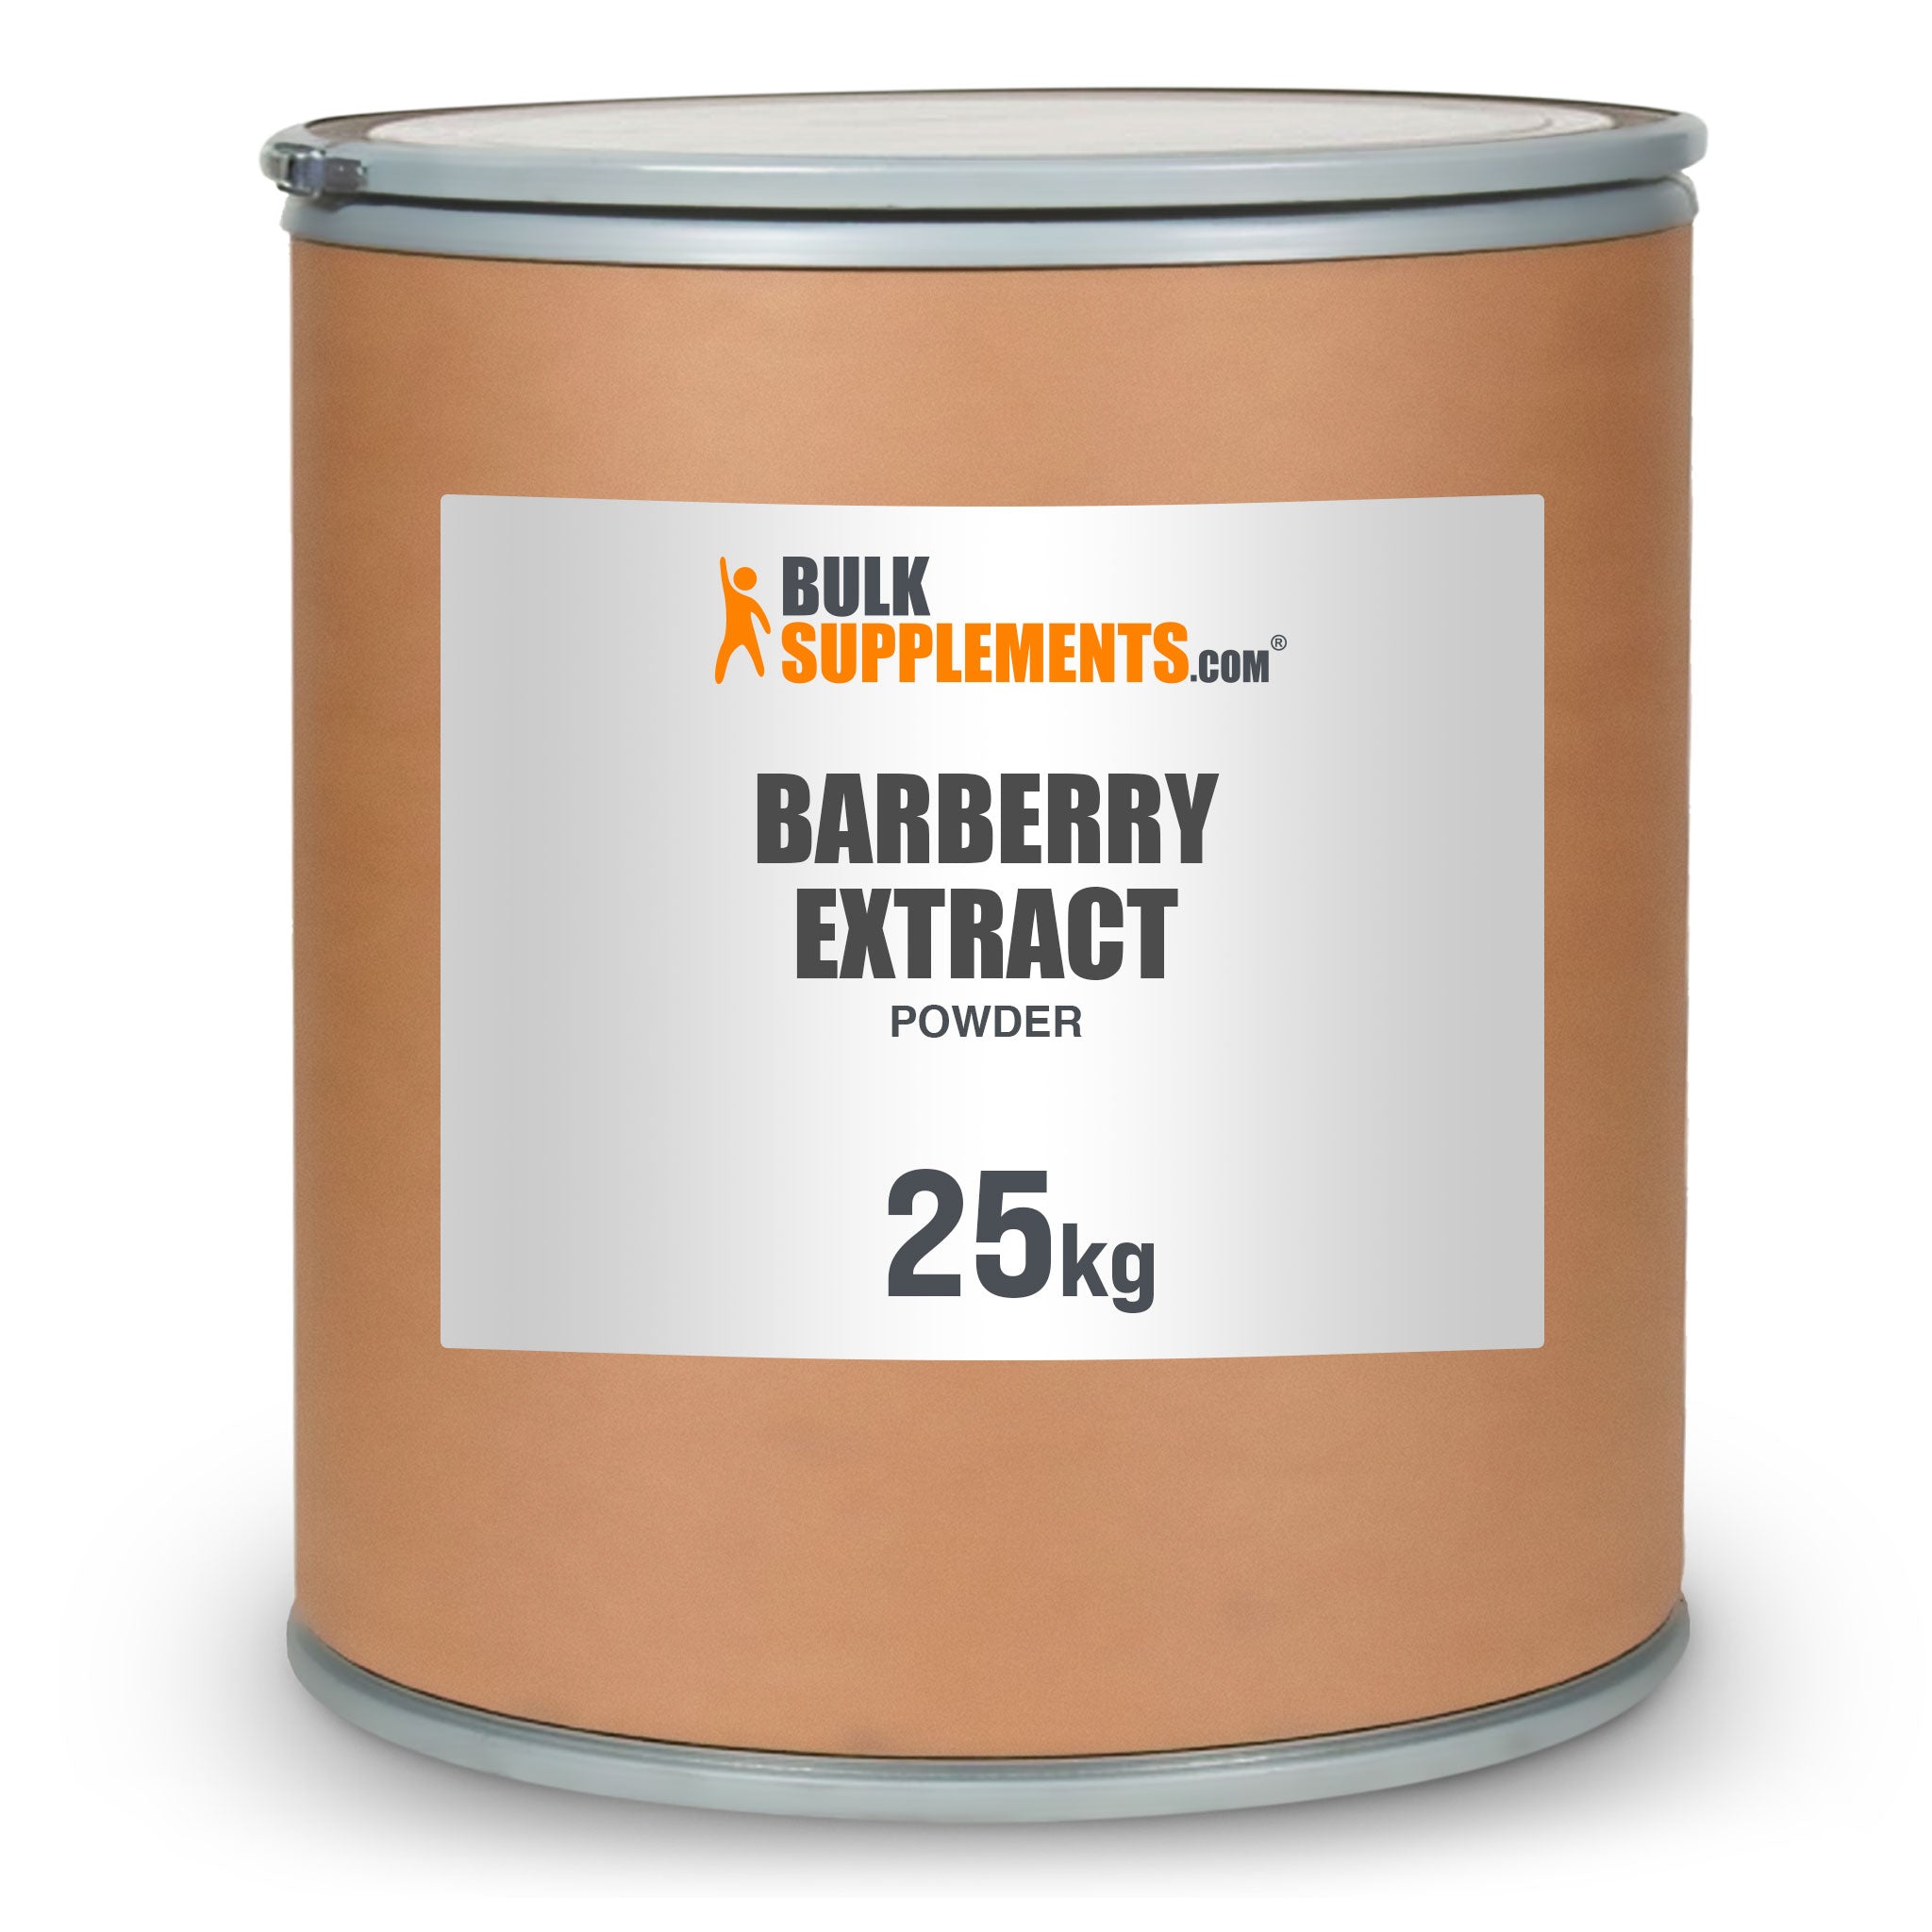 Bulk Barberry Extract Powder in a 25kg can